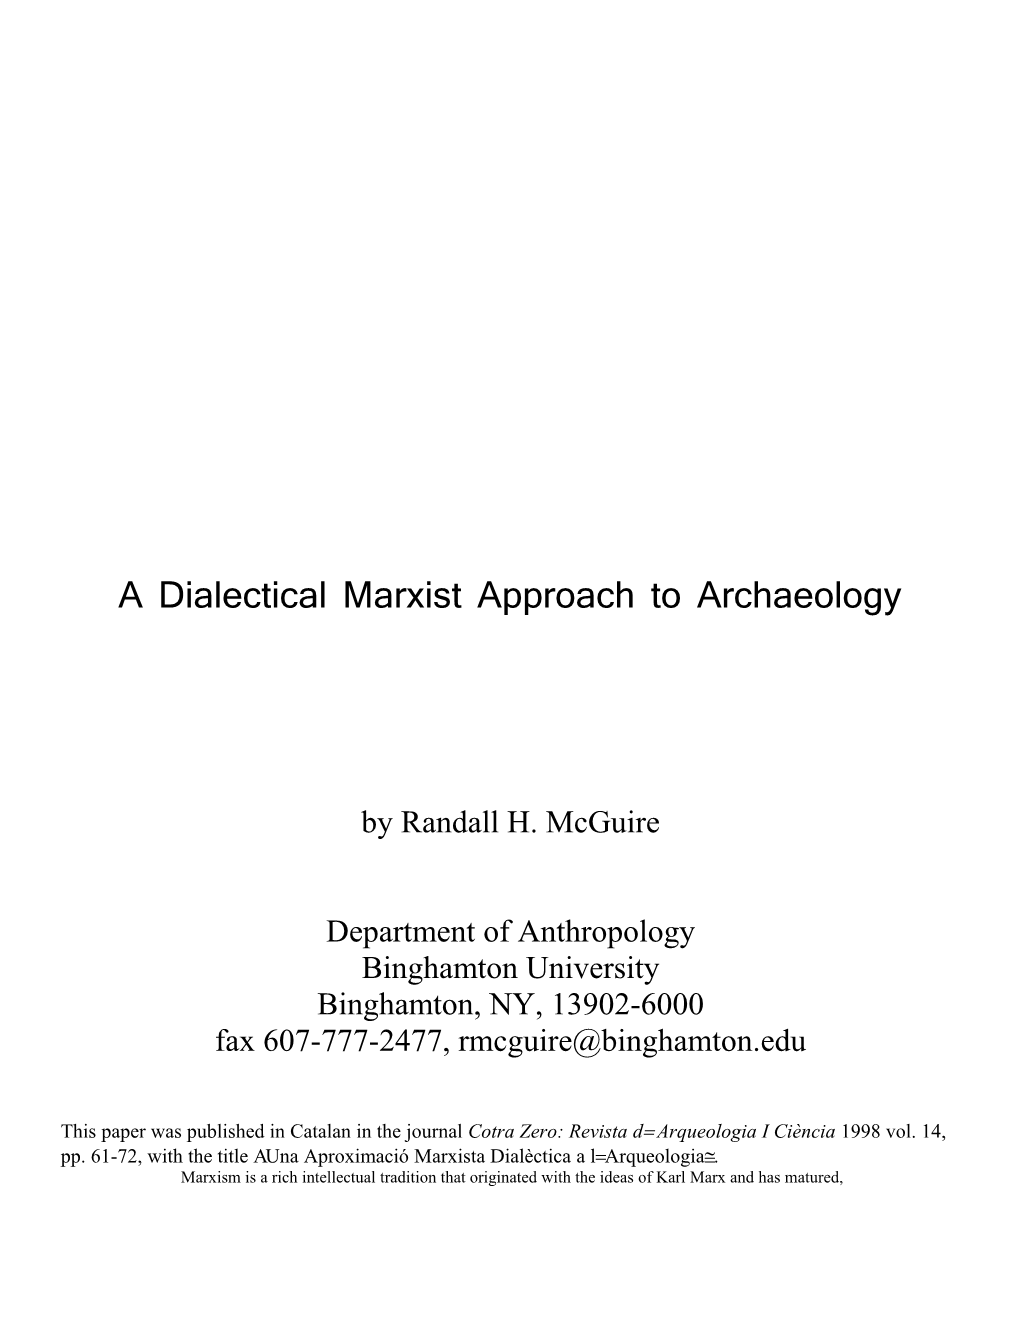 A Dialectical Marxist Approach to Archaeology